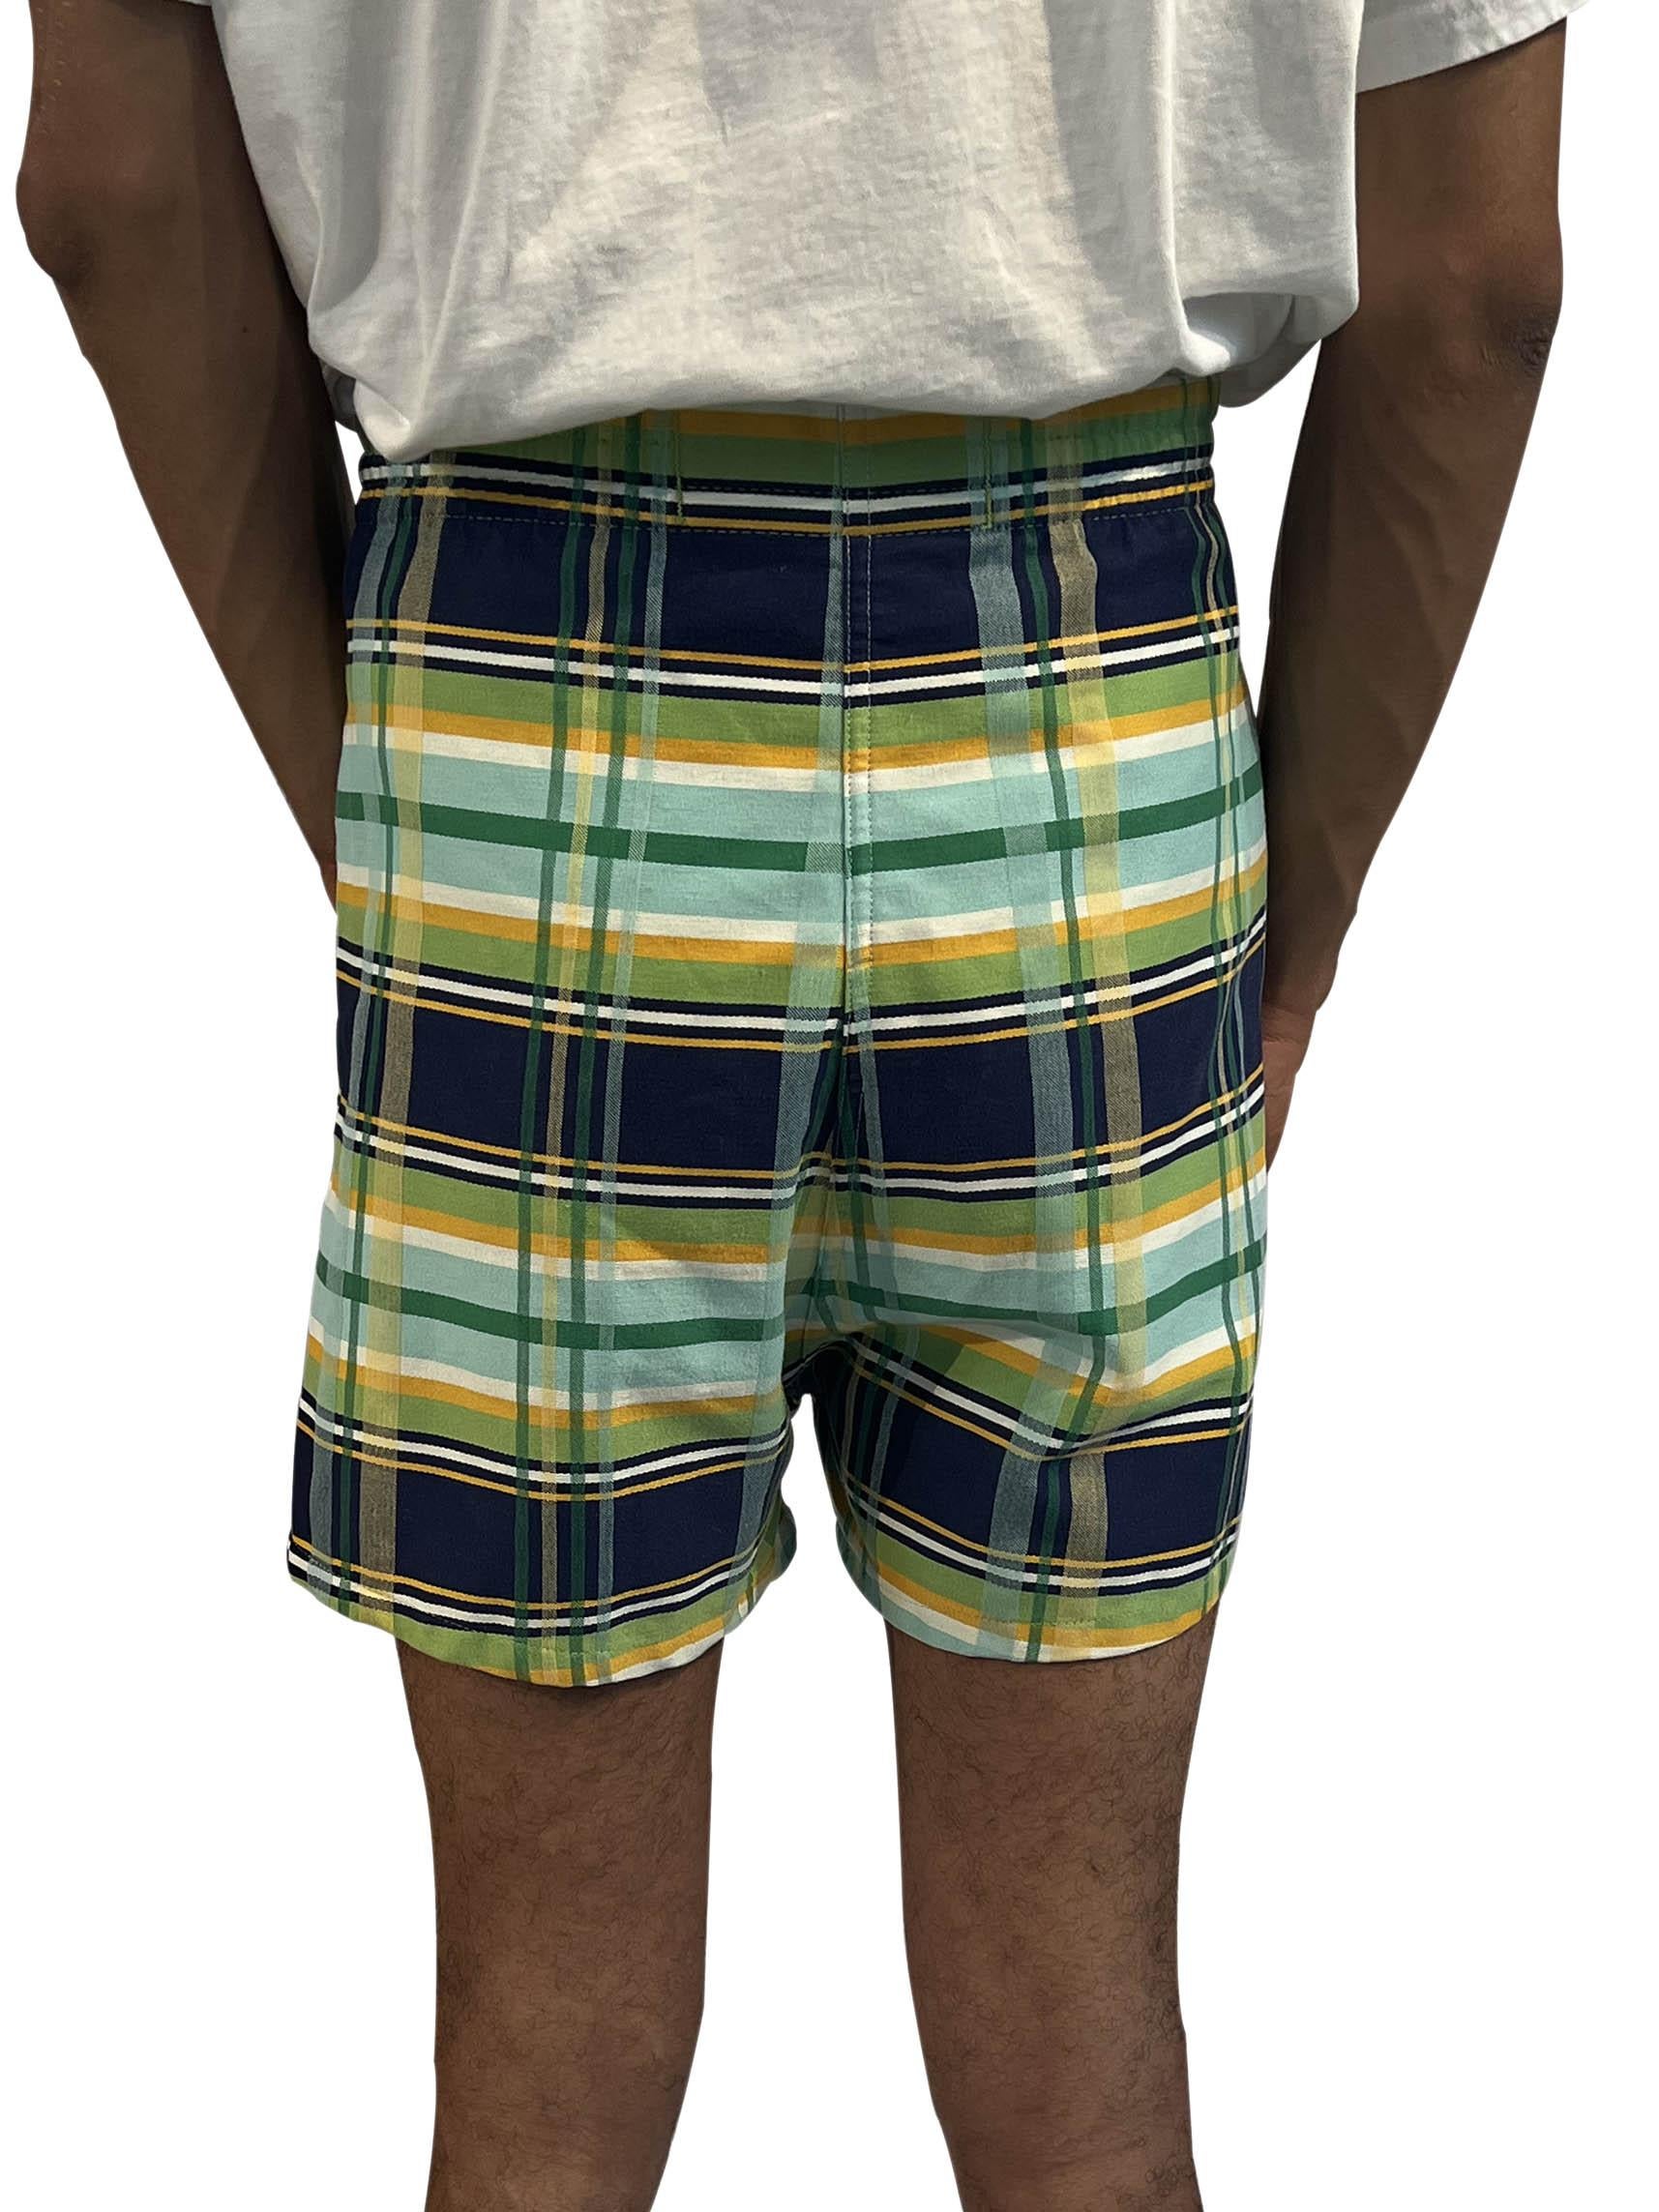 1970S Lime Green & Navy Cotton Blend Plaid Short Shorts Built In Underwear In Excellent Condition For Sale In New York, NY